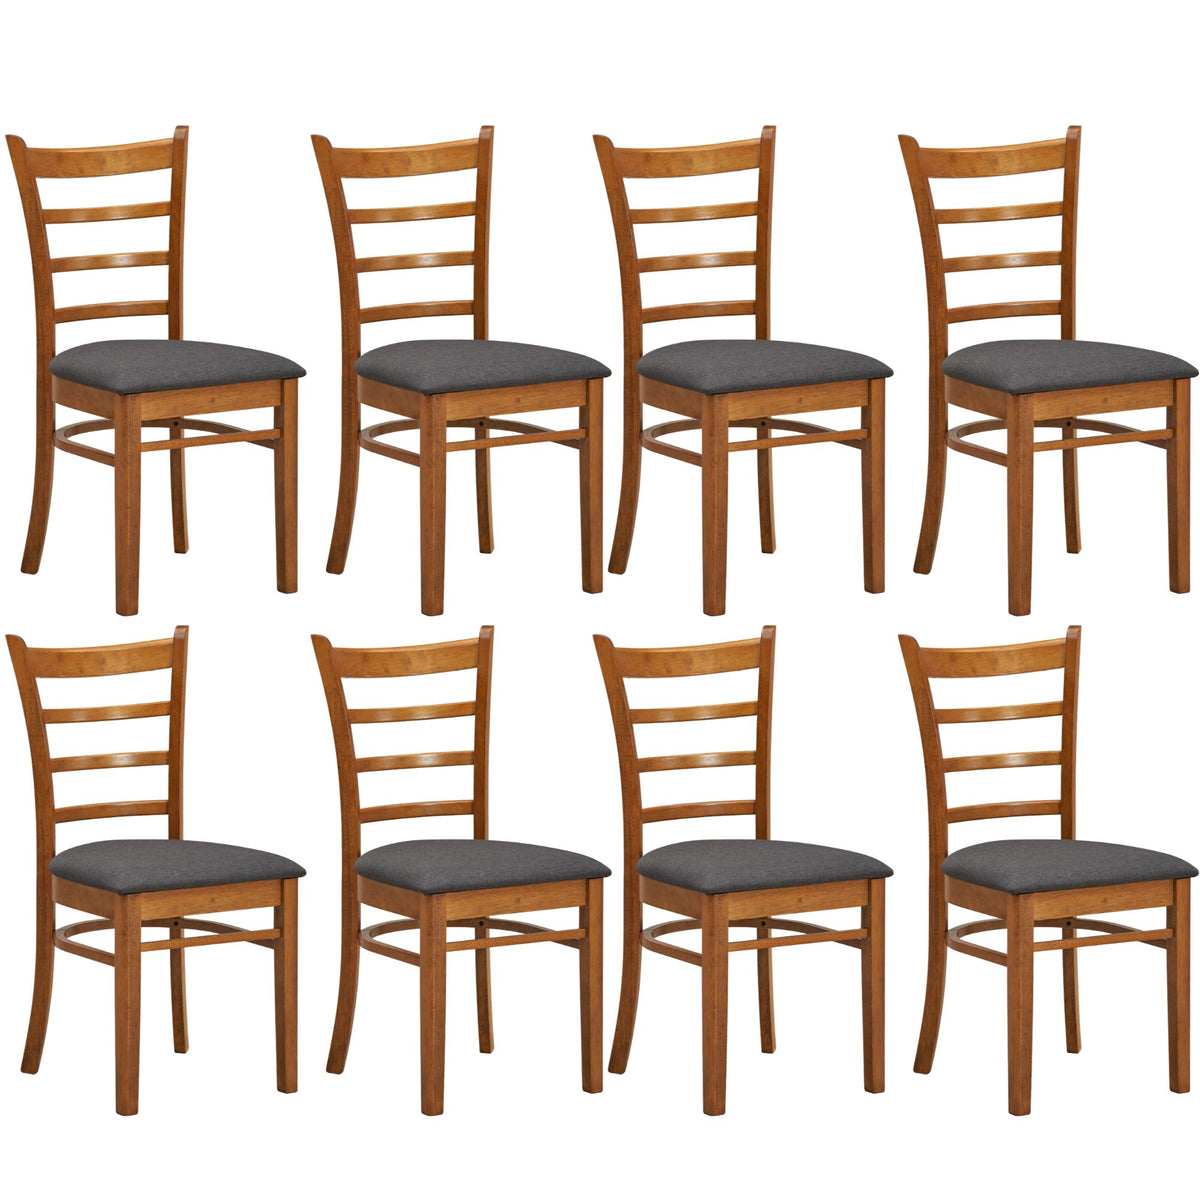 Linaria Dining Chair Set of 8 Crossback Solid Rubber Wood Fabric Seat - Walnut